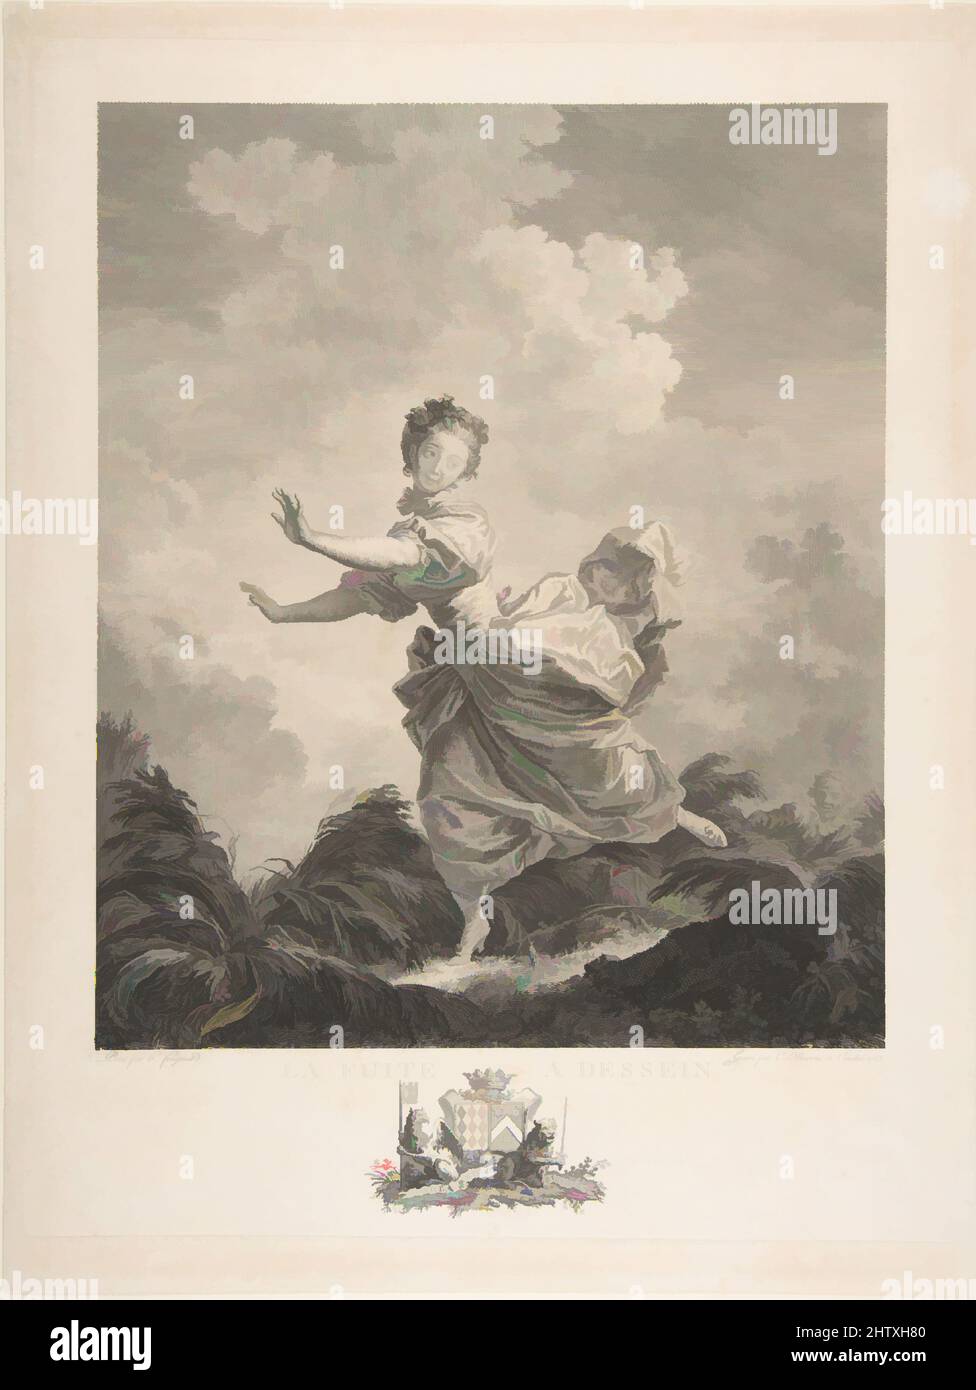 Art inspired by La Fuite a Dessein, Etching and engraving; second state of three (Portalis), Sheet: 15 11/16 x 11 7/8 in. (39.8 x 30.2 cm), Prints, After Jean Honoré Fragonard (French, Grasse 1732–1806 Paris), Engraved by Charles François Adrien Macret (French, Abbeville 1751–1789, Classic works modernized by Artotop with a splash of modernity. Shapes, color and value, eye-catching visual impact on art. Emotions through freedom of artworks in a contemporary way. A timeless message pursuing a wildly creative new direction. Artists turning to the digital medium and creating the Artotop NFT Stock Photo